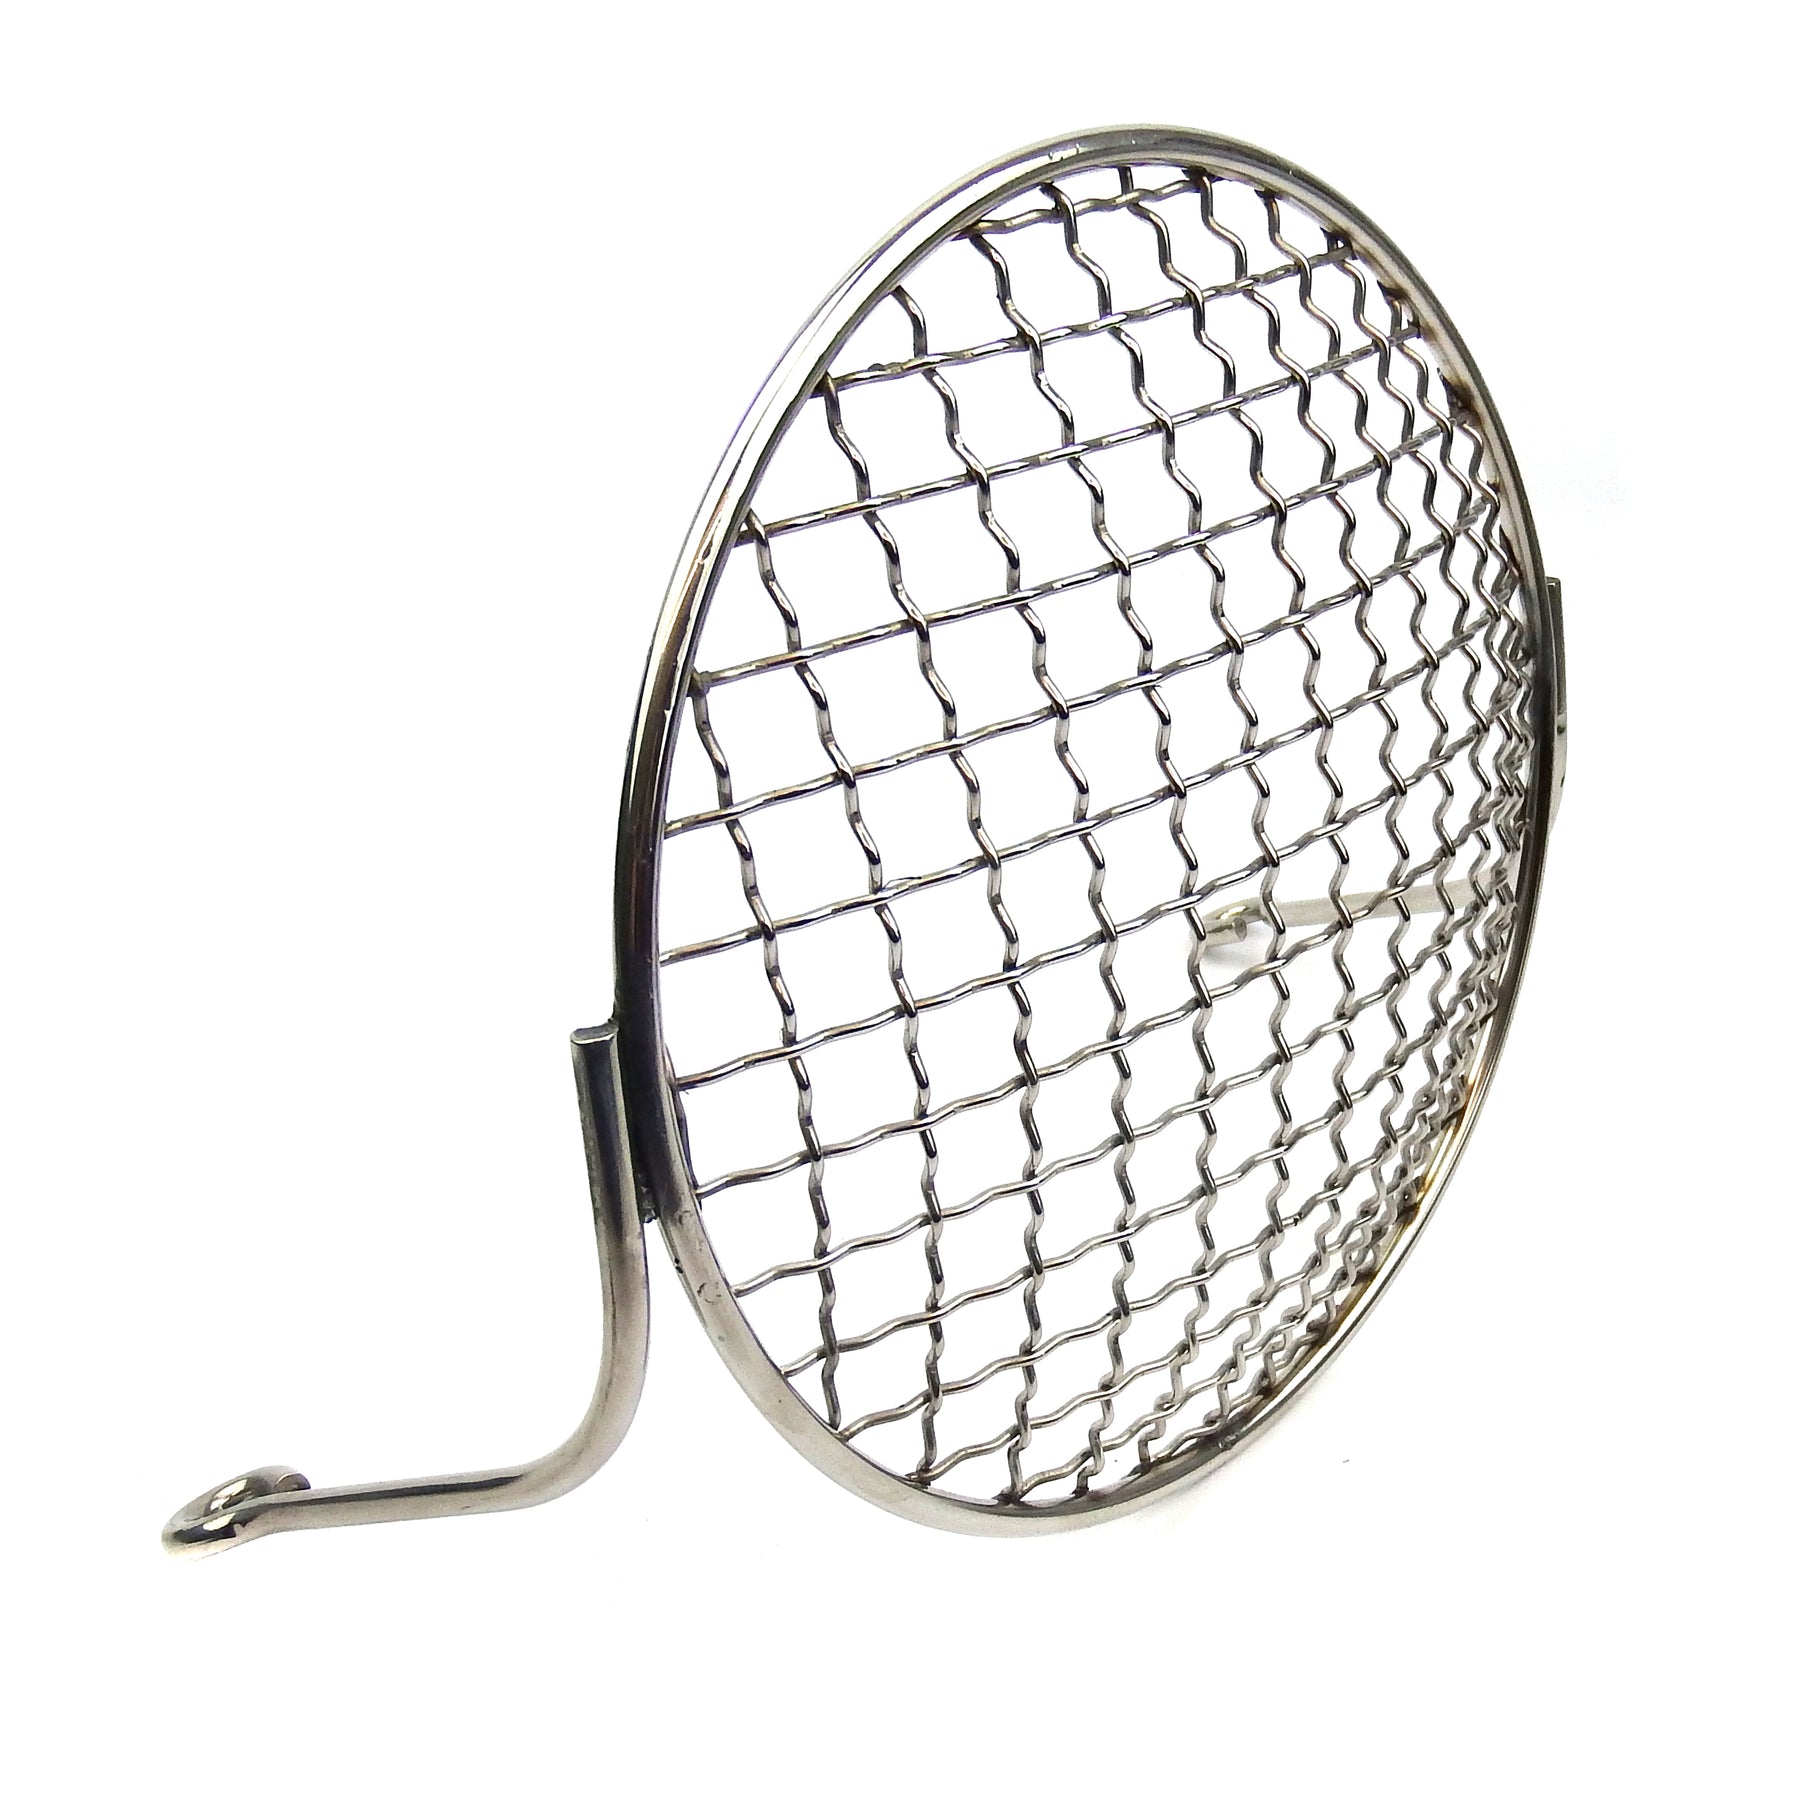 Vespa PX PE T5 Classic PK Headlight Grill - Polished Stainless Steel